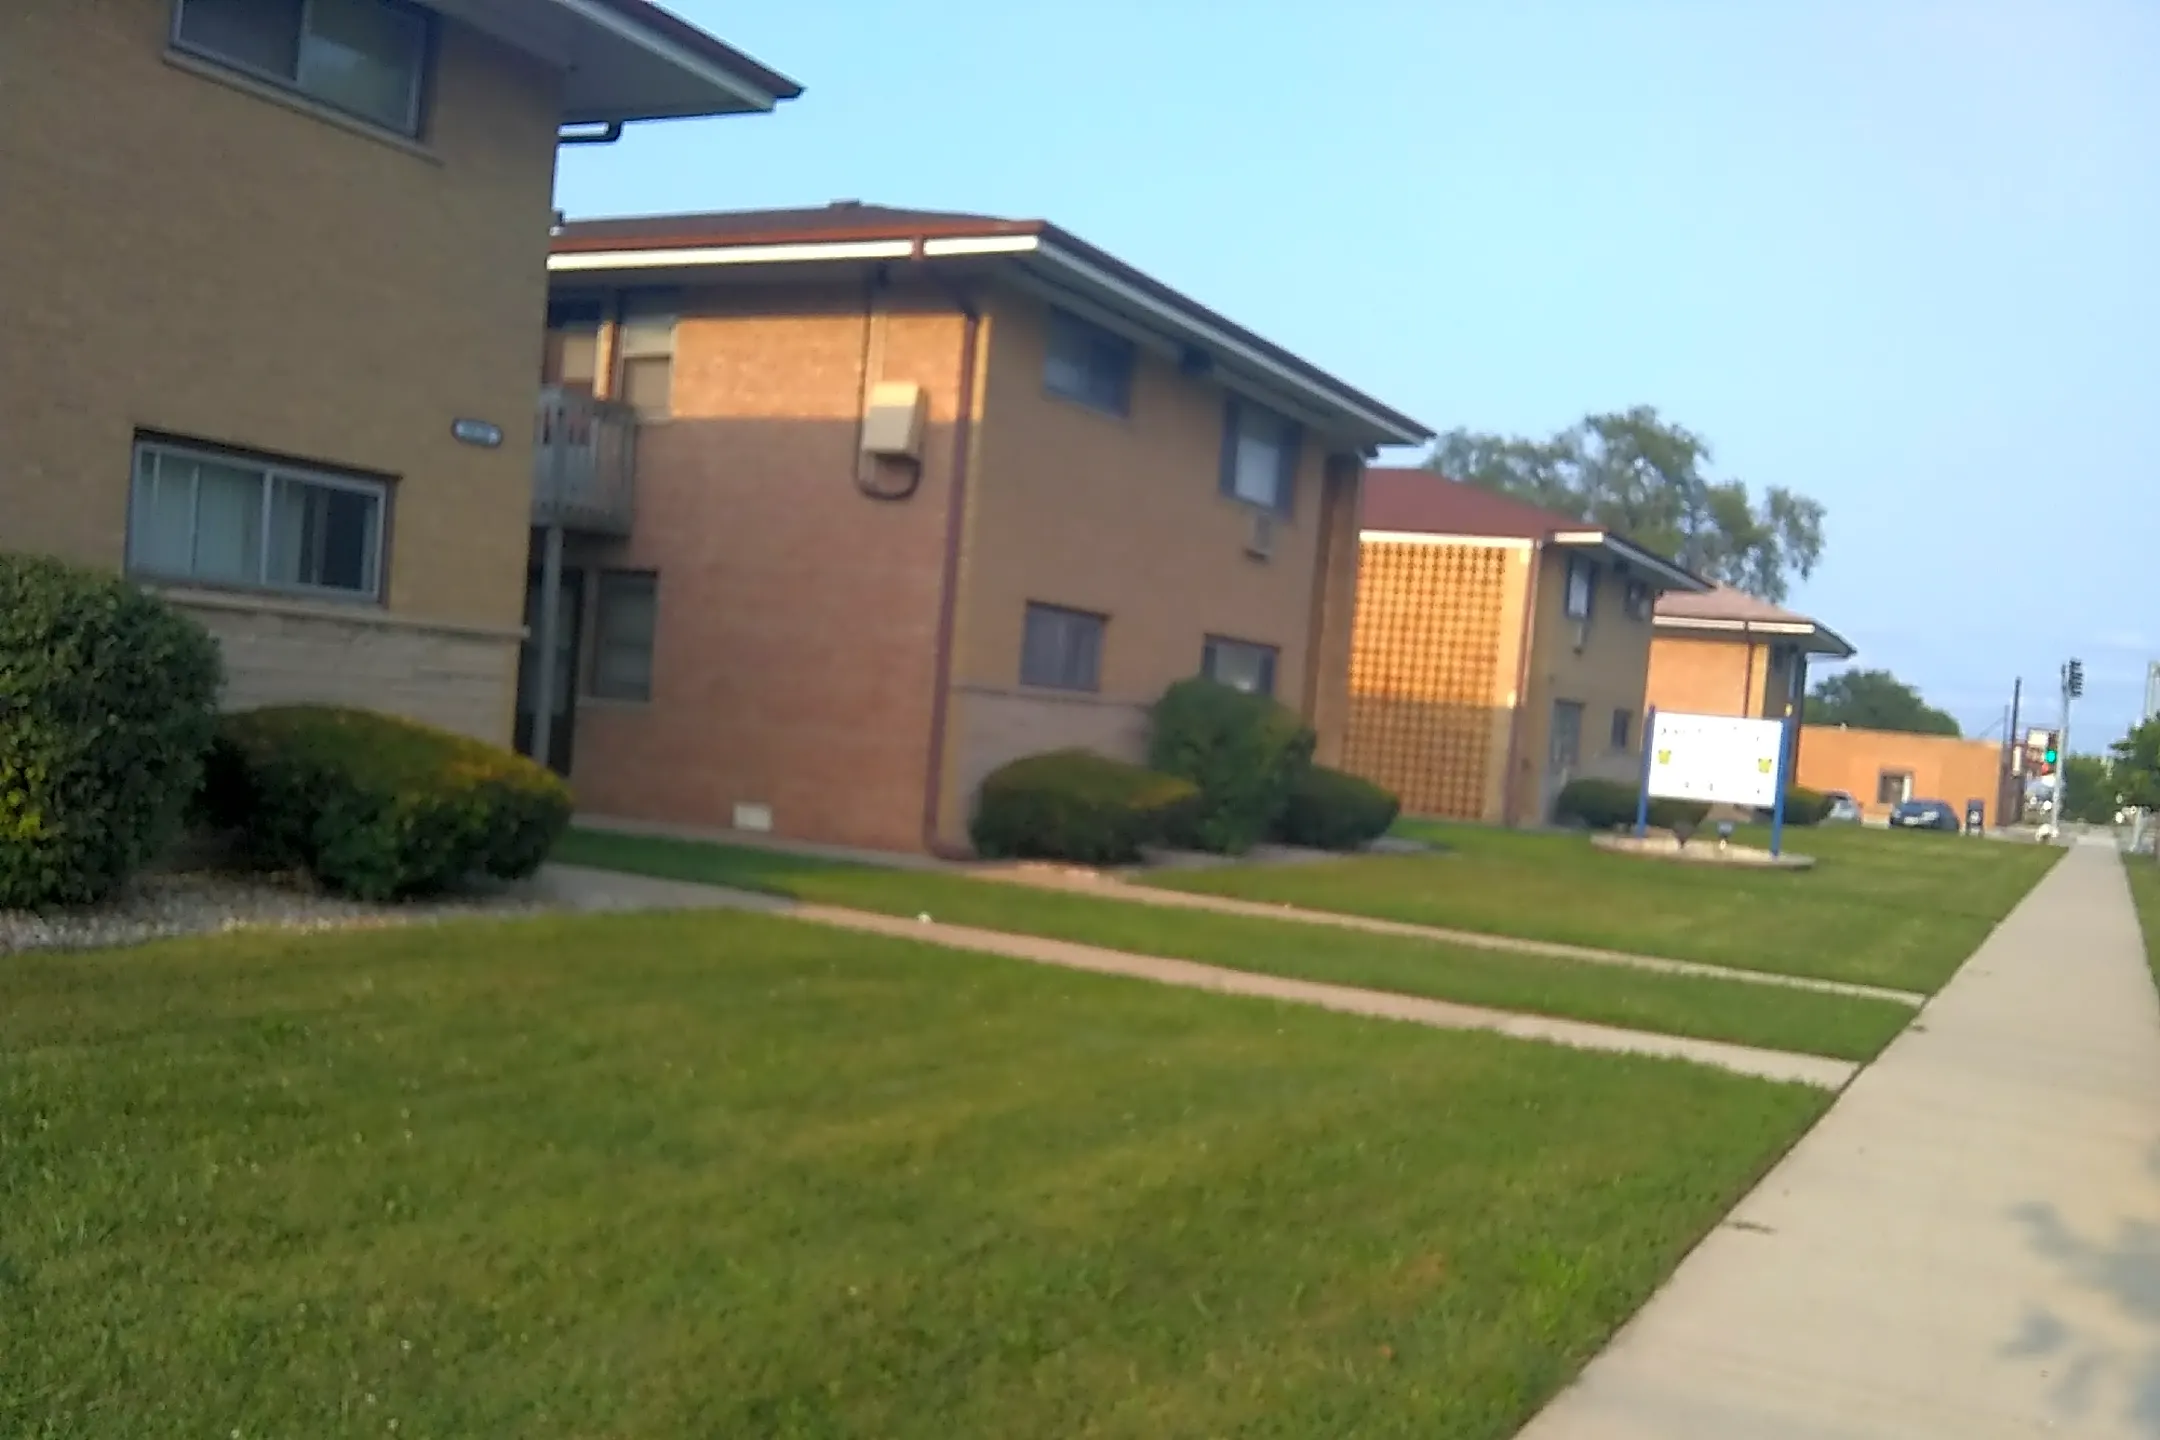 Pool - Amberley Courts Apartments - Midlothian, IL